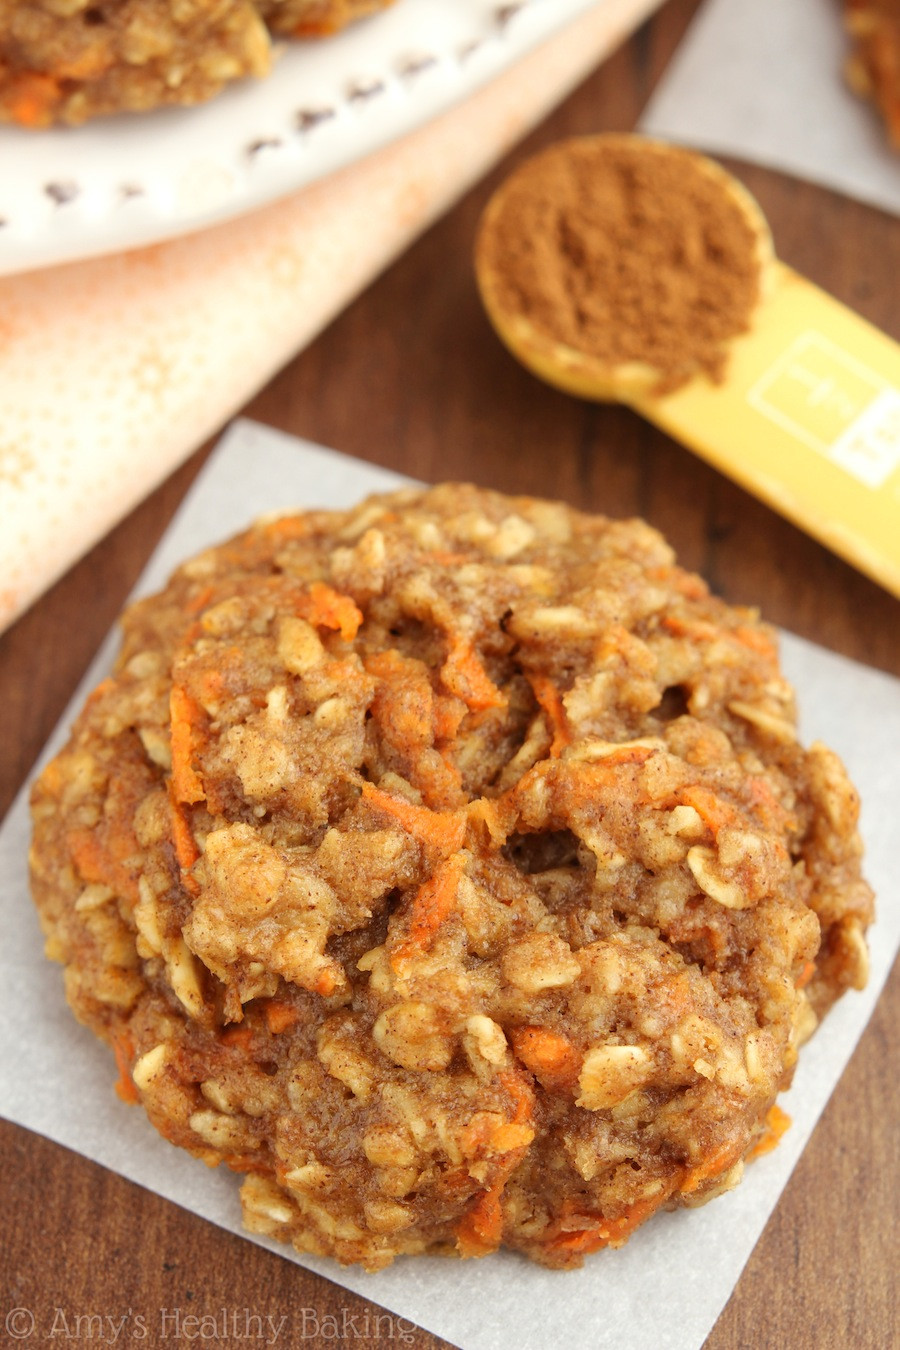 Healthy Homemade Oatmeal Cookies
 Carrot Cake Oatmeal Cookies With a Step by Step Video